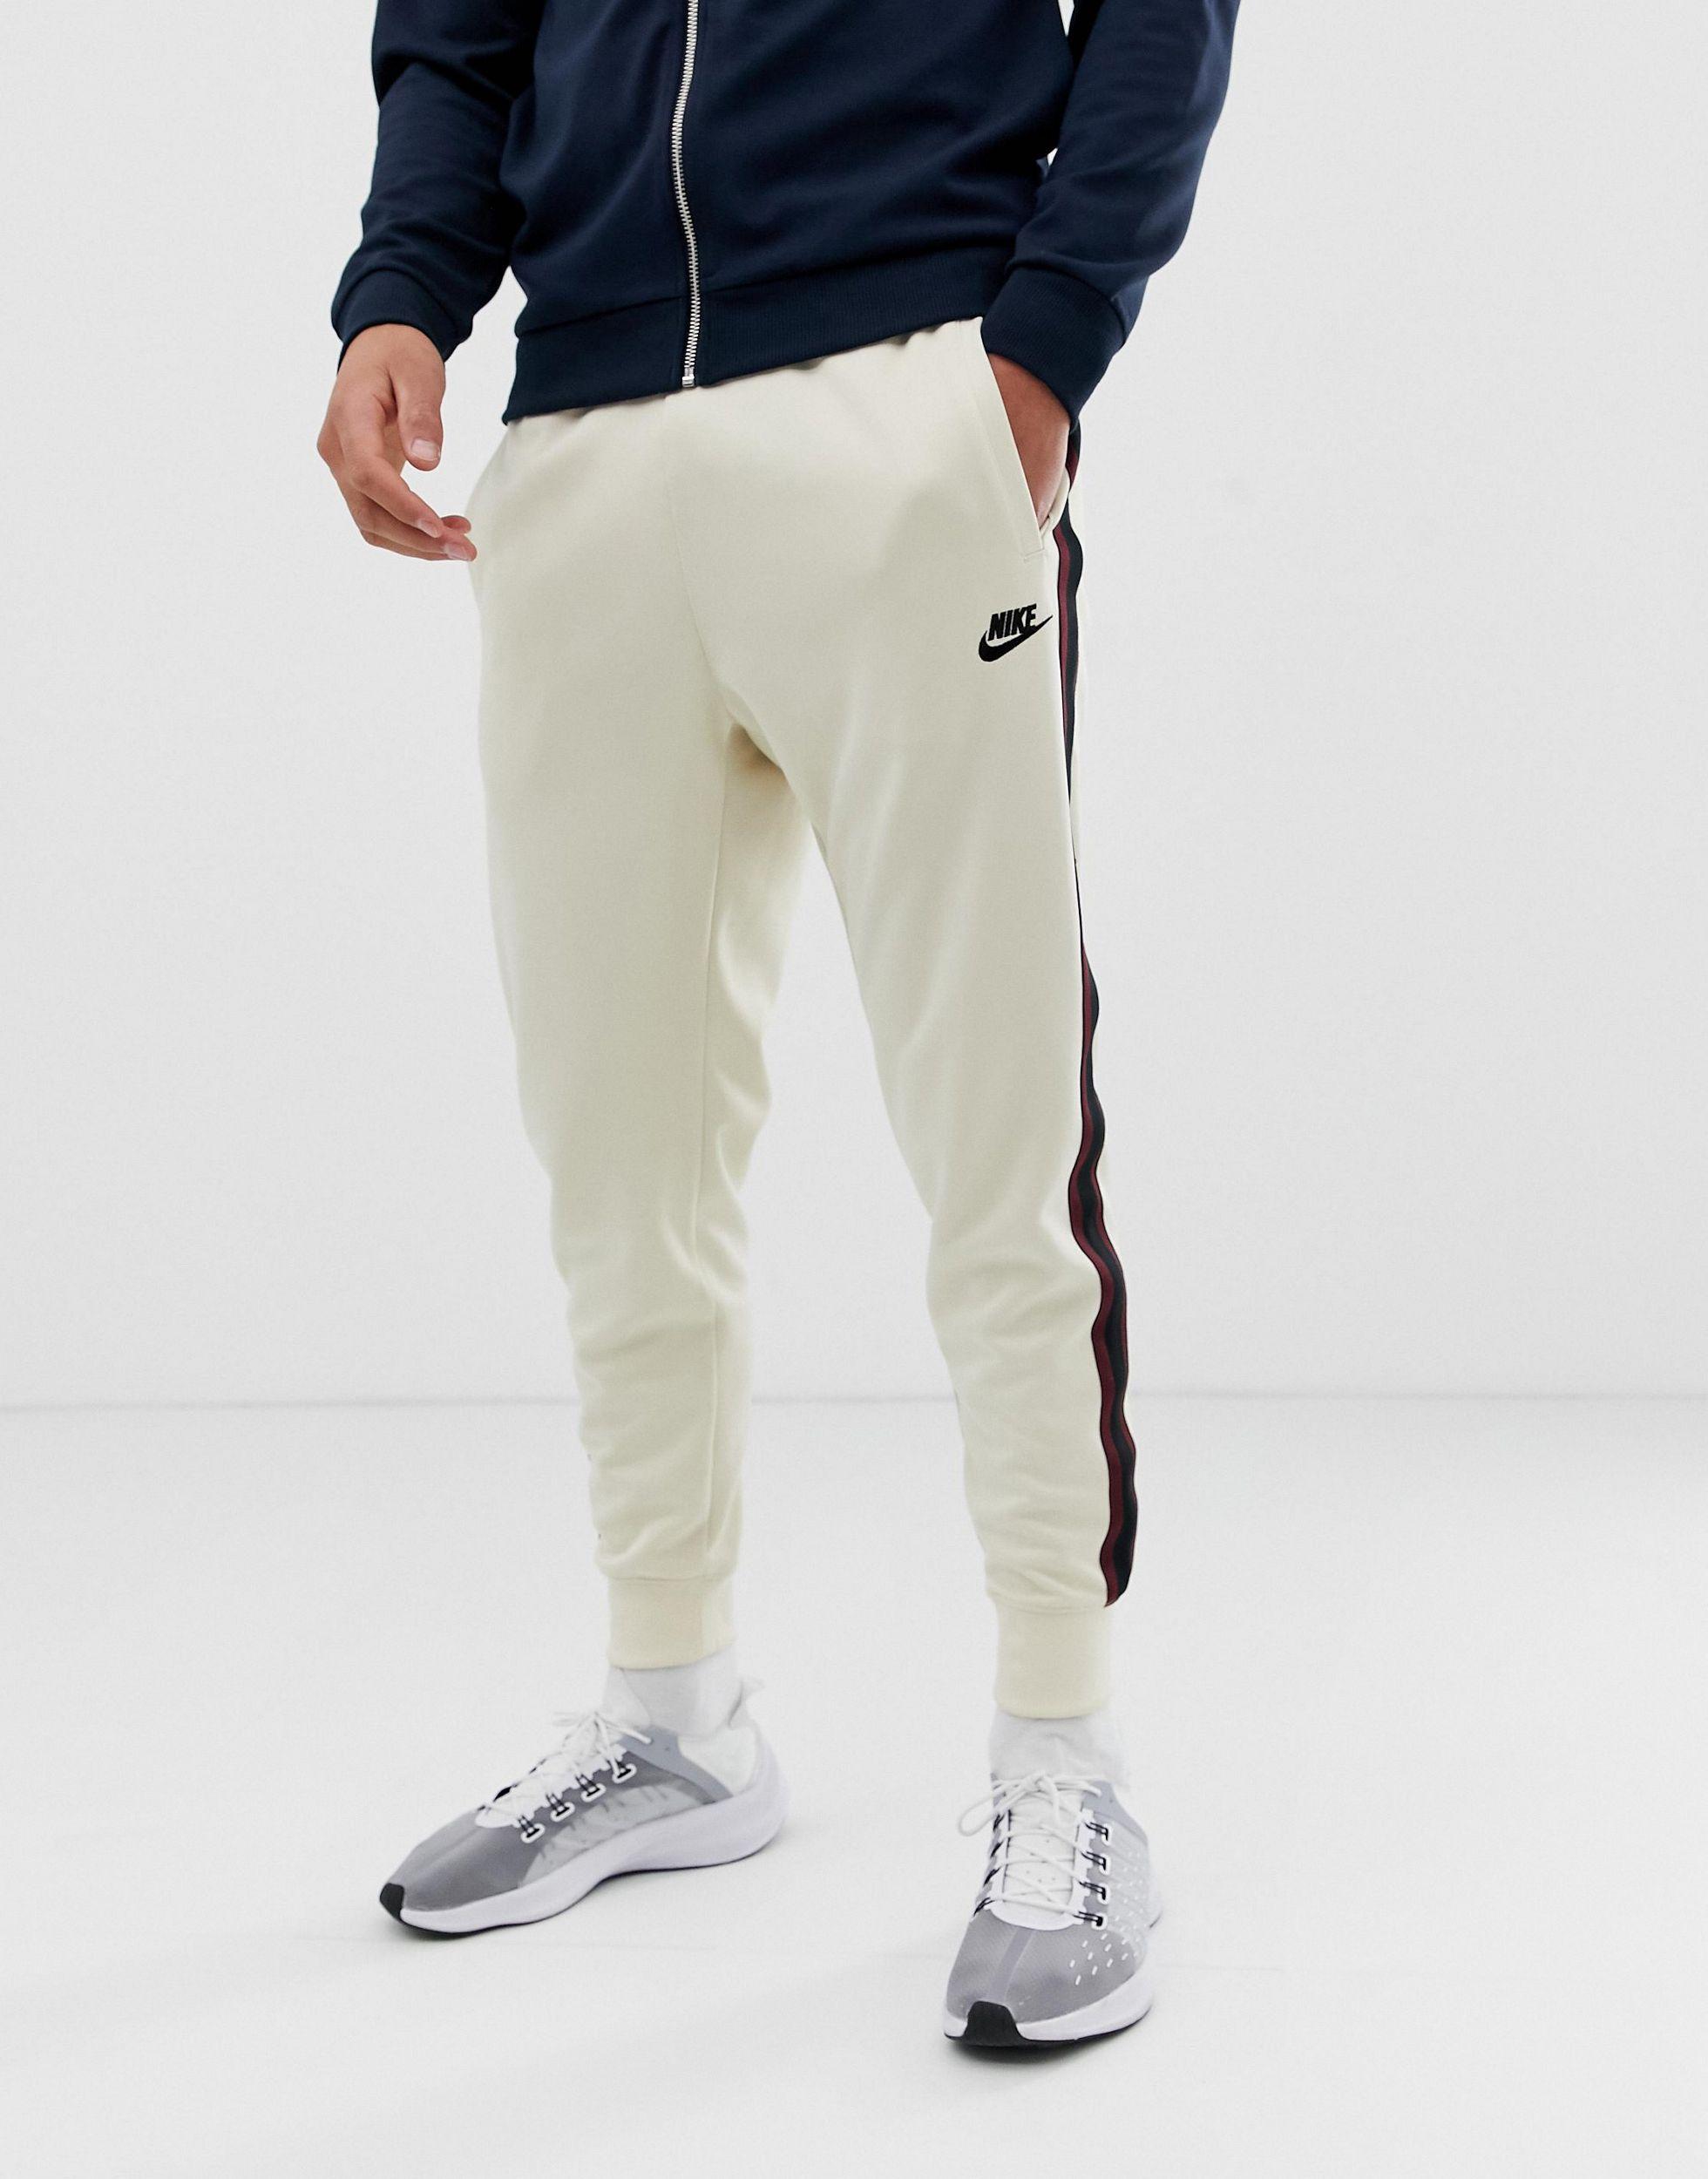 Nike Cotton Tribute Sweatpants in Beige (Natural) for Men - Lyst